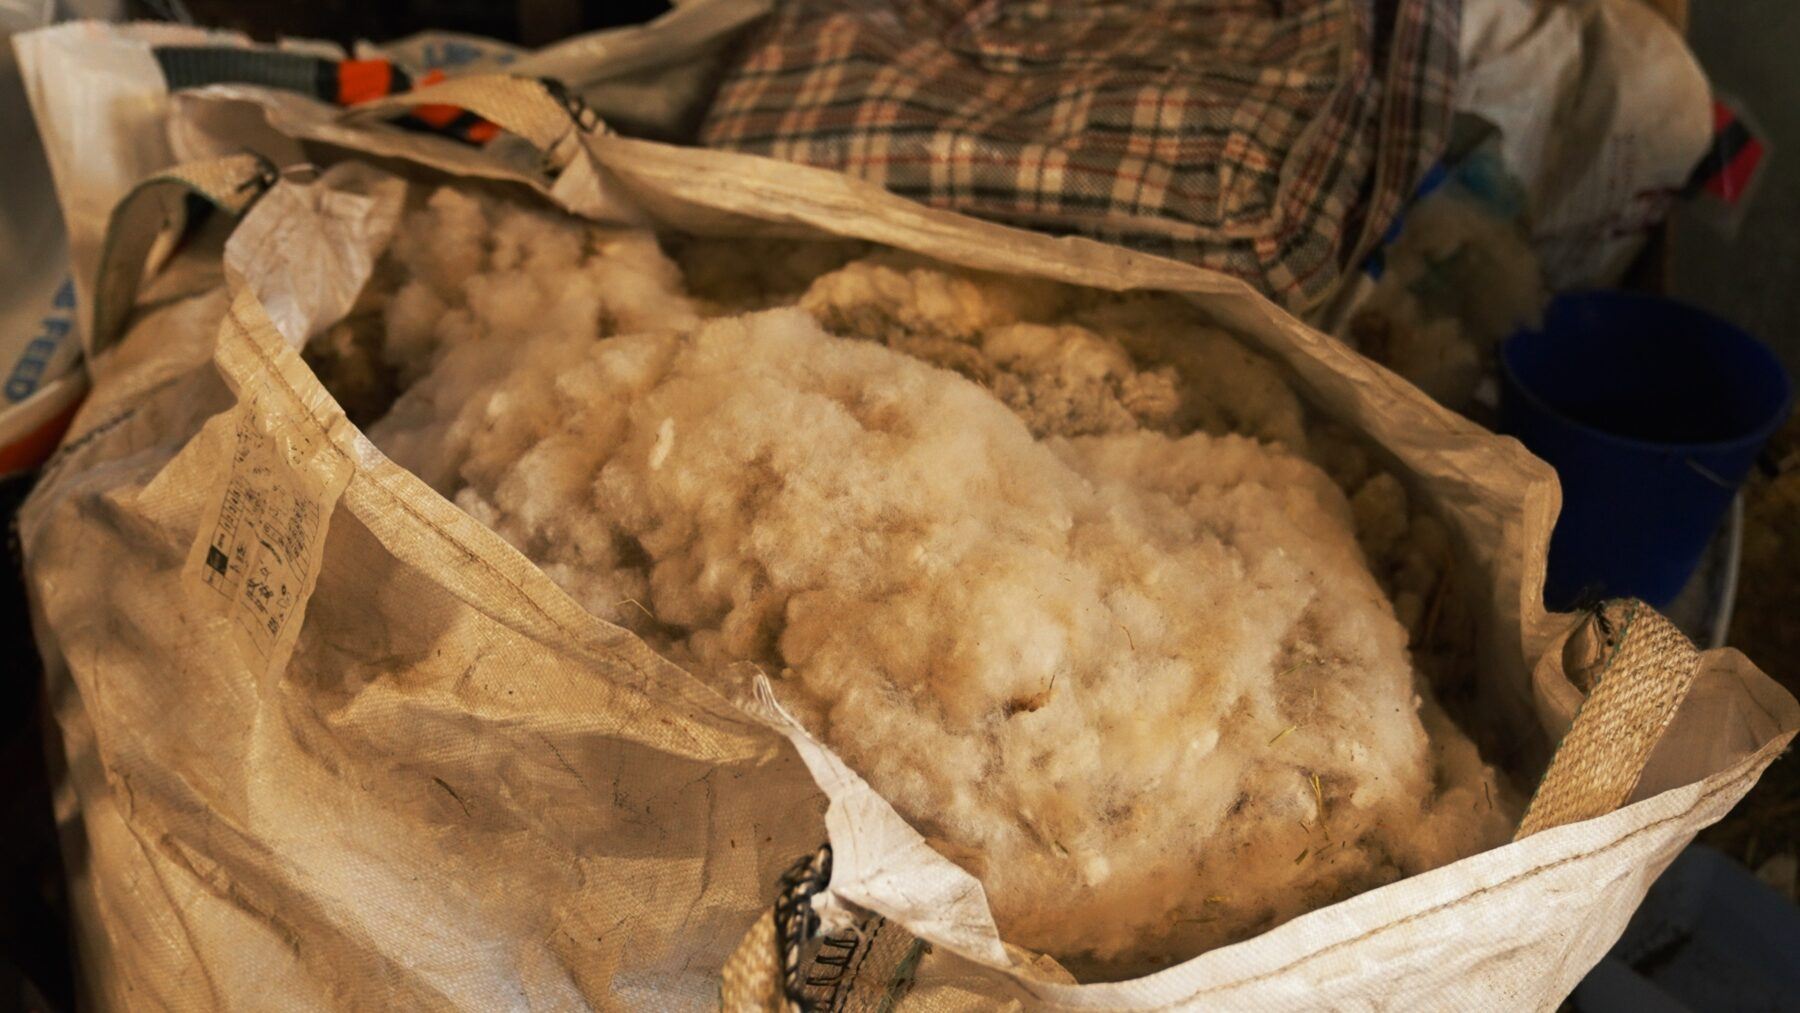 Dorset Down Sheep wool, collected from our partnered farm in the West Midlands